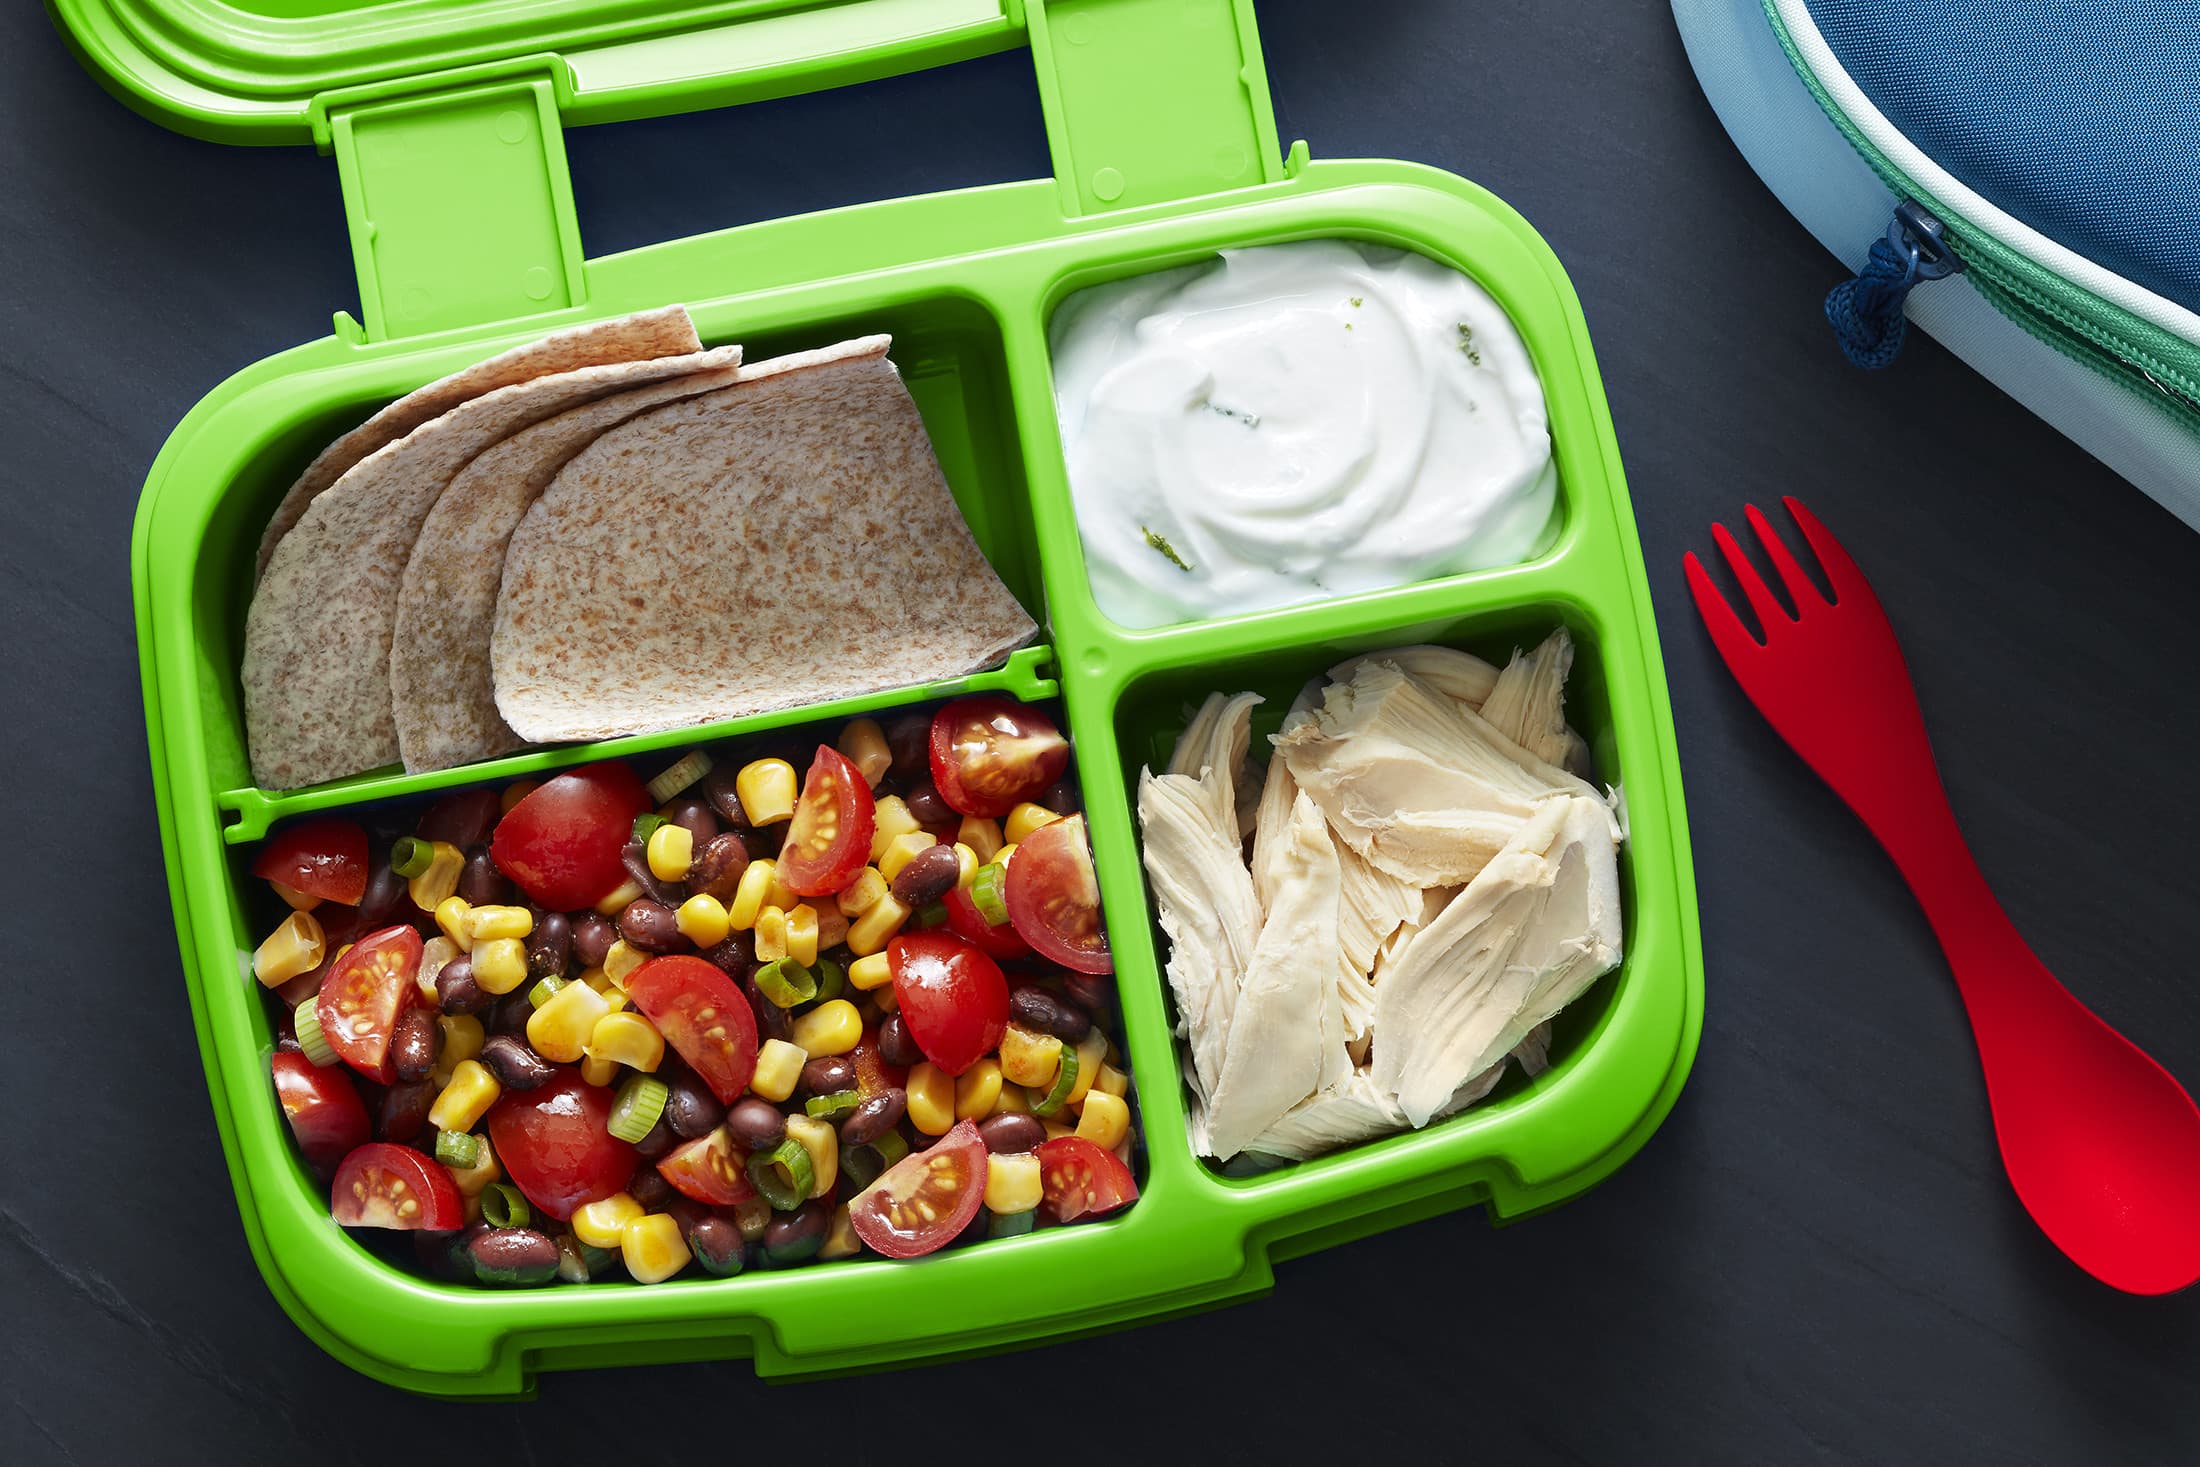 Pulled Chicken “Bento” with One Sweet® Tomato Black Bean Salsa